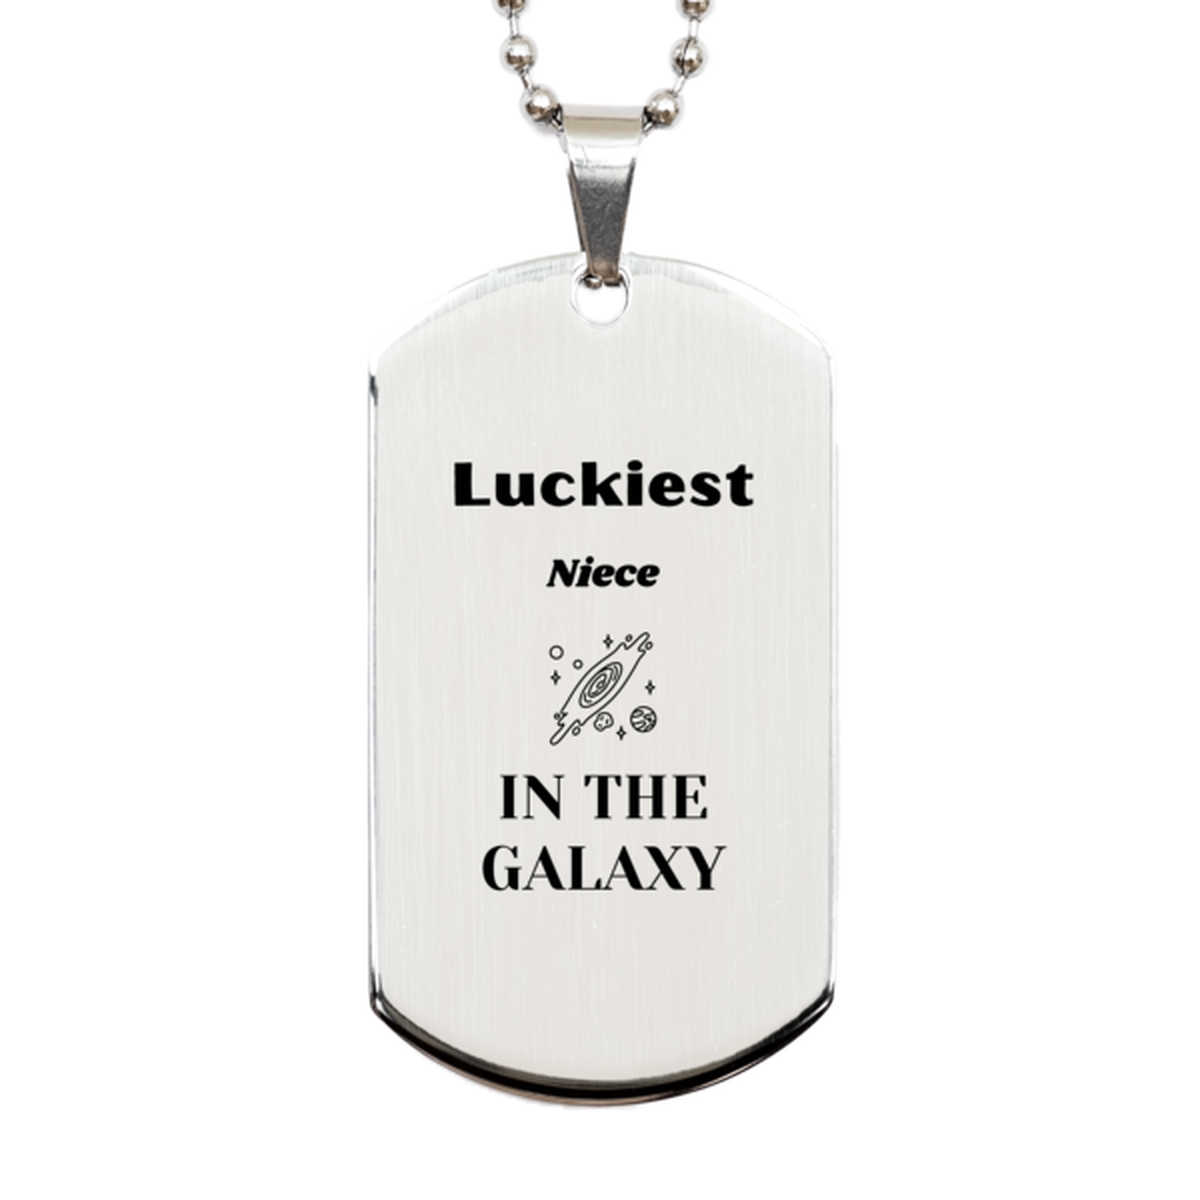 Luckiest Niece in the Galaxy, To My Niece Engraved Gifts, Christmas Niece Silver Dog Tag Gifts, X-mas Birthday Unique Gifts For Niece Men Women